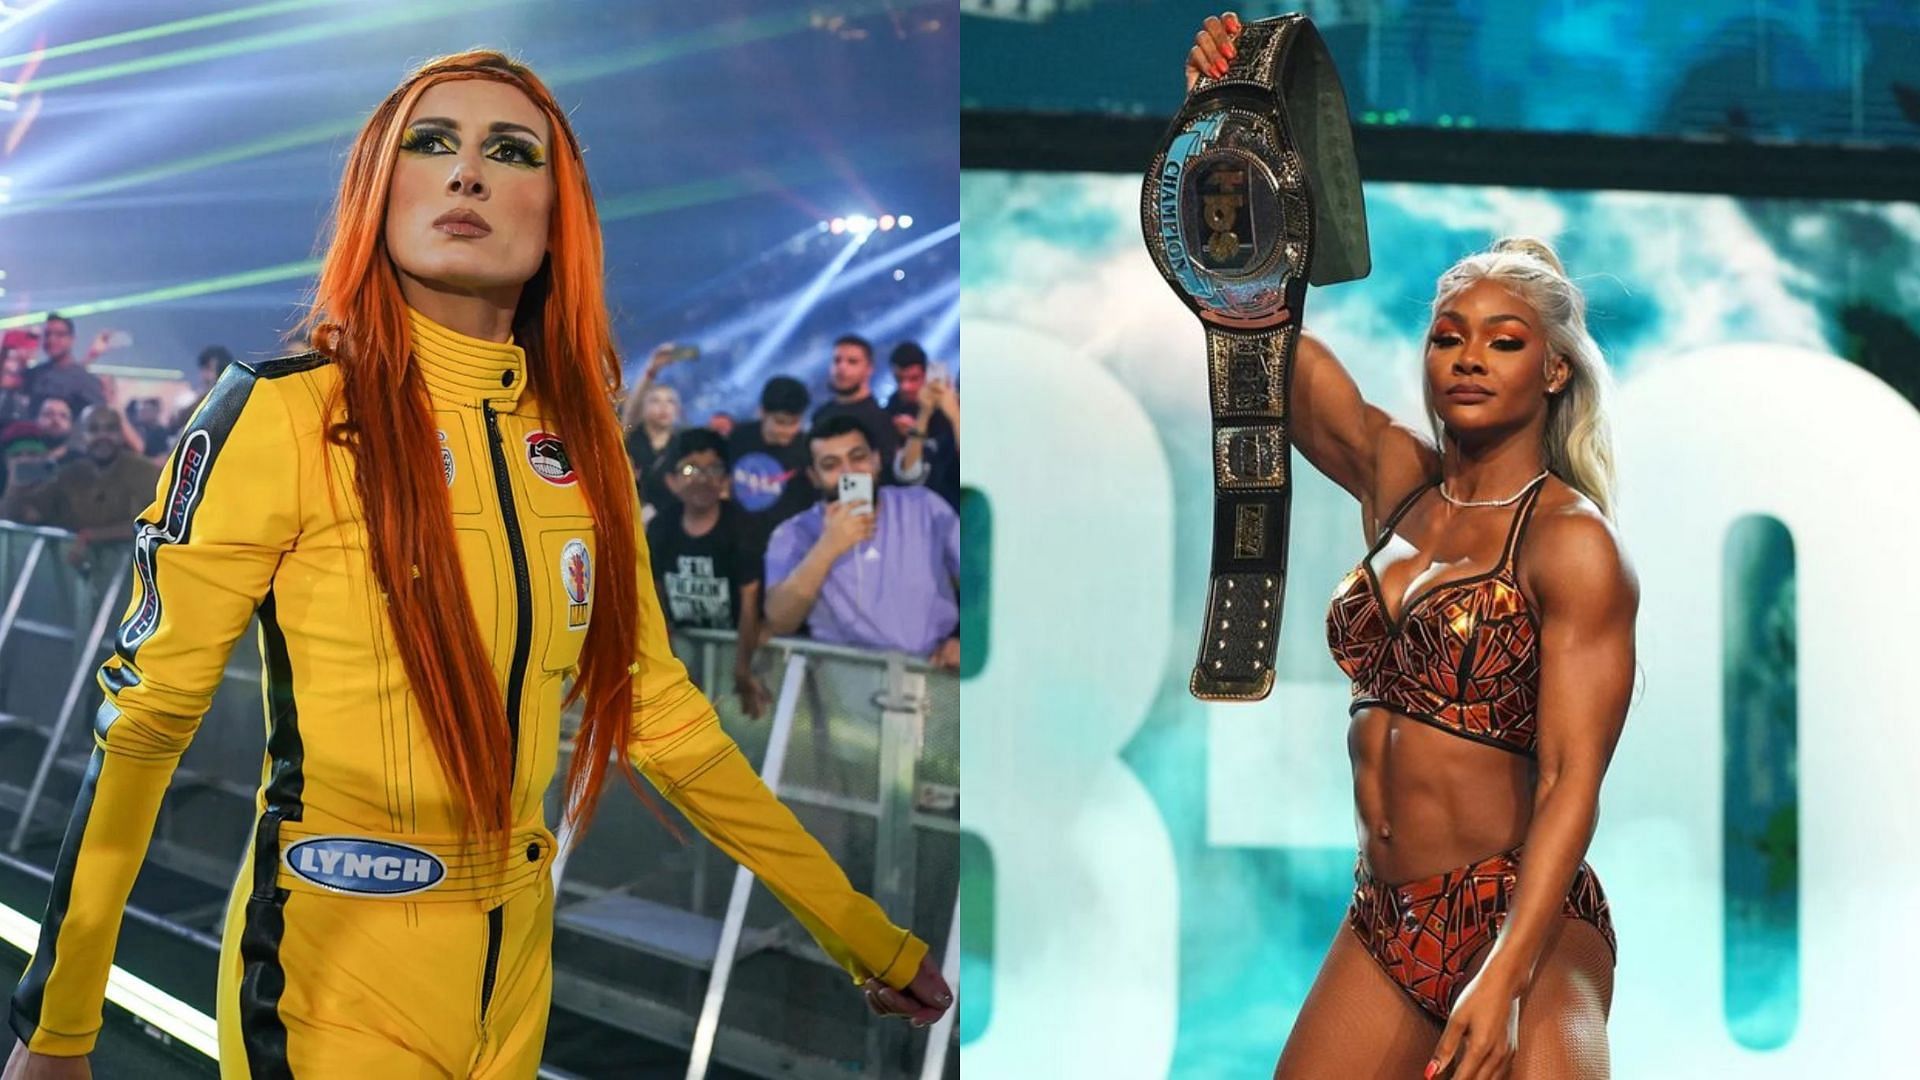 Are we ready for Becky Lynch vs Jade Cargill?! #WWE #WWERaw